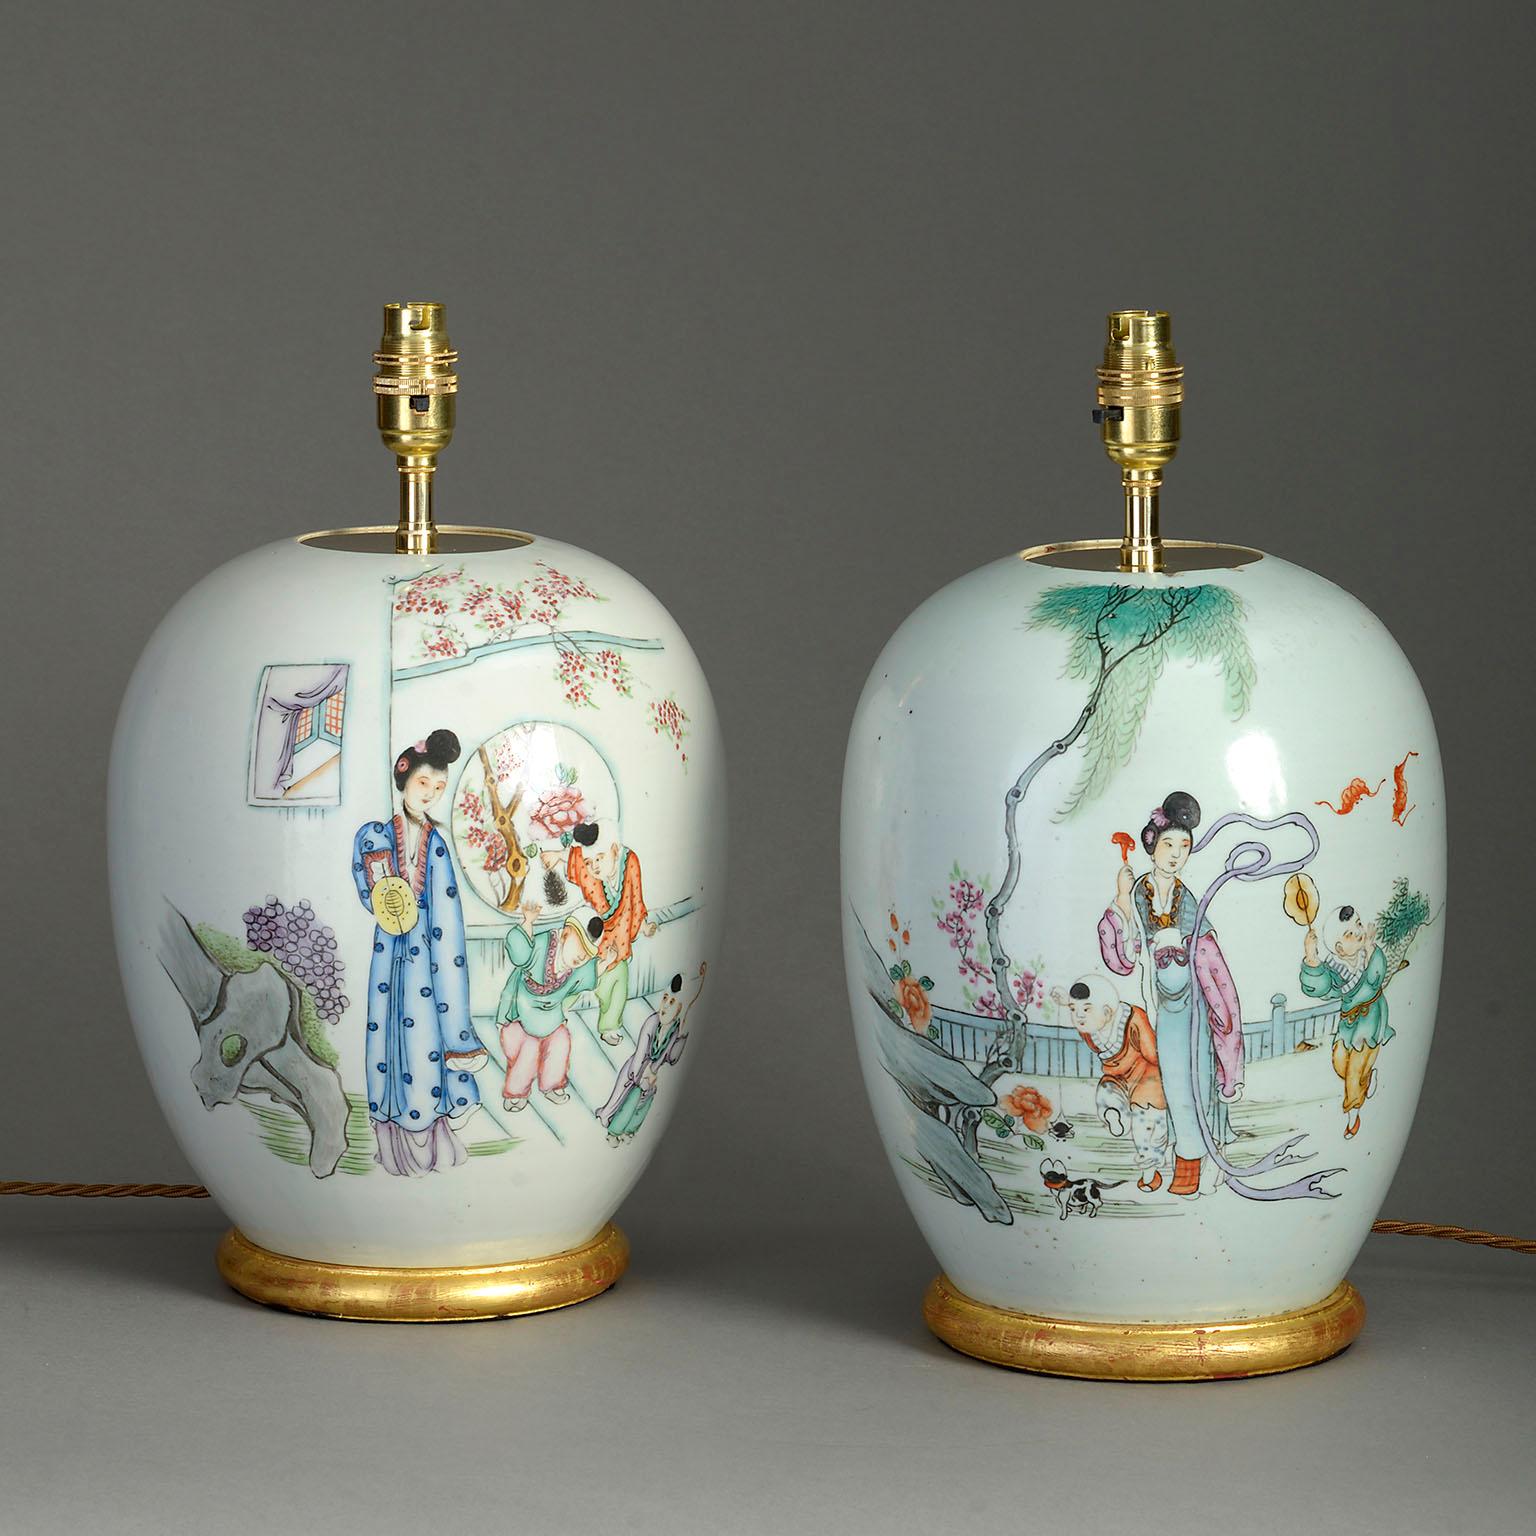 A pair of mid-20th century porcelain jars, of bulbous form, decorated with courtly ladies, the reverse sides with Chinese characters. Now mounted as lamps on giltwood bases.

Republic Period.

Dimensions refer to jars and bases.

Shades not